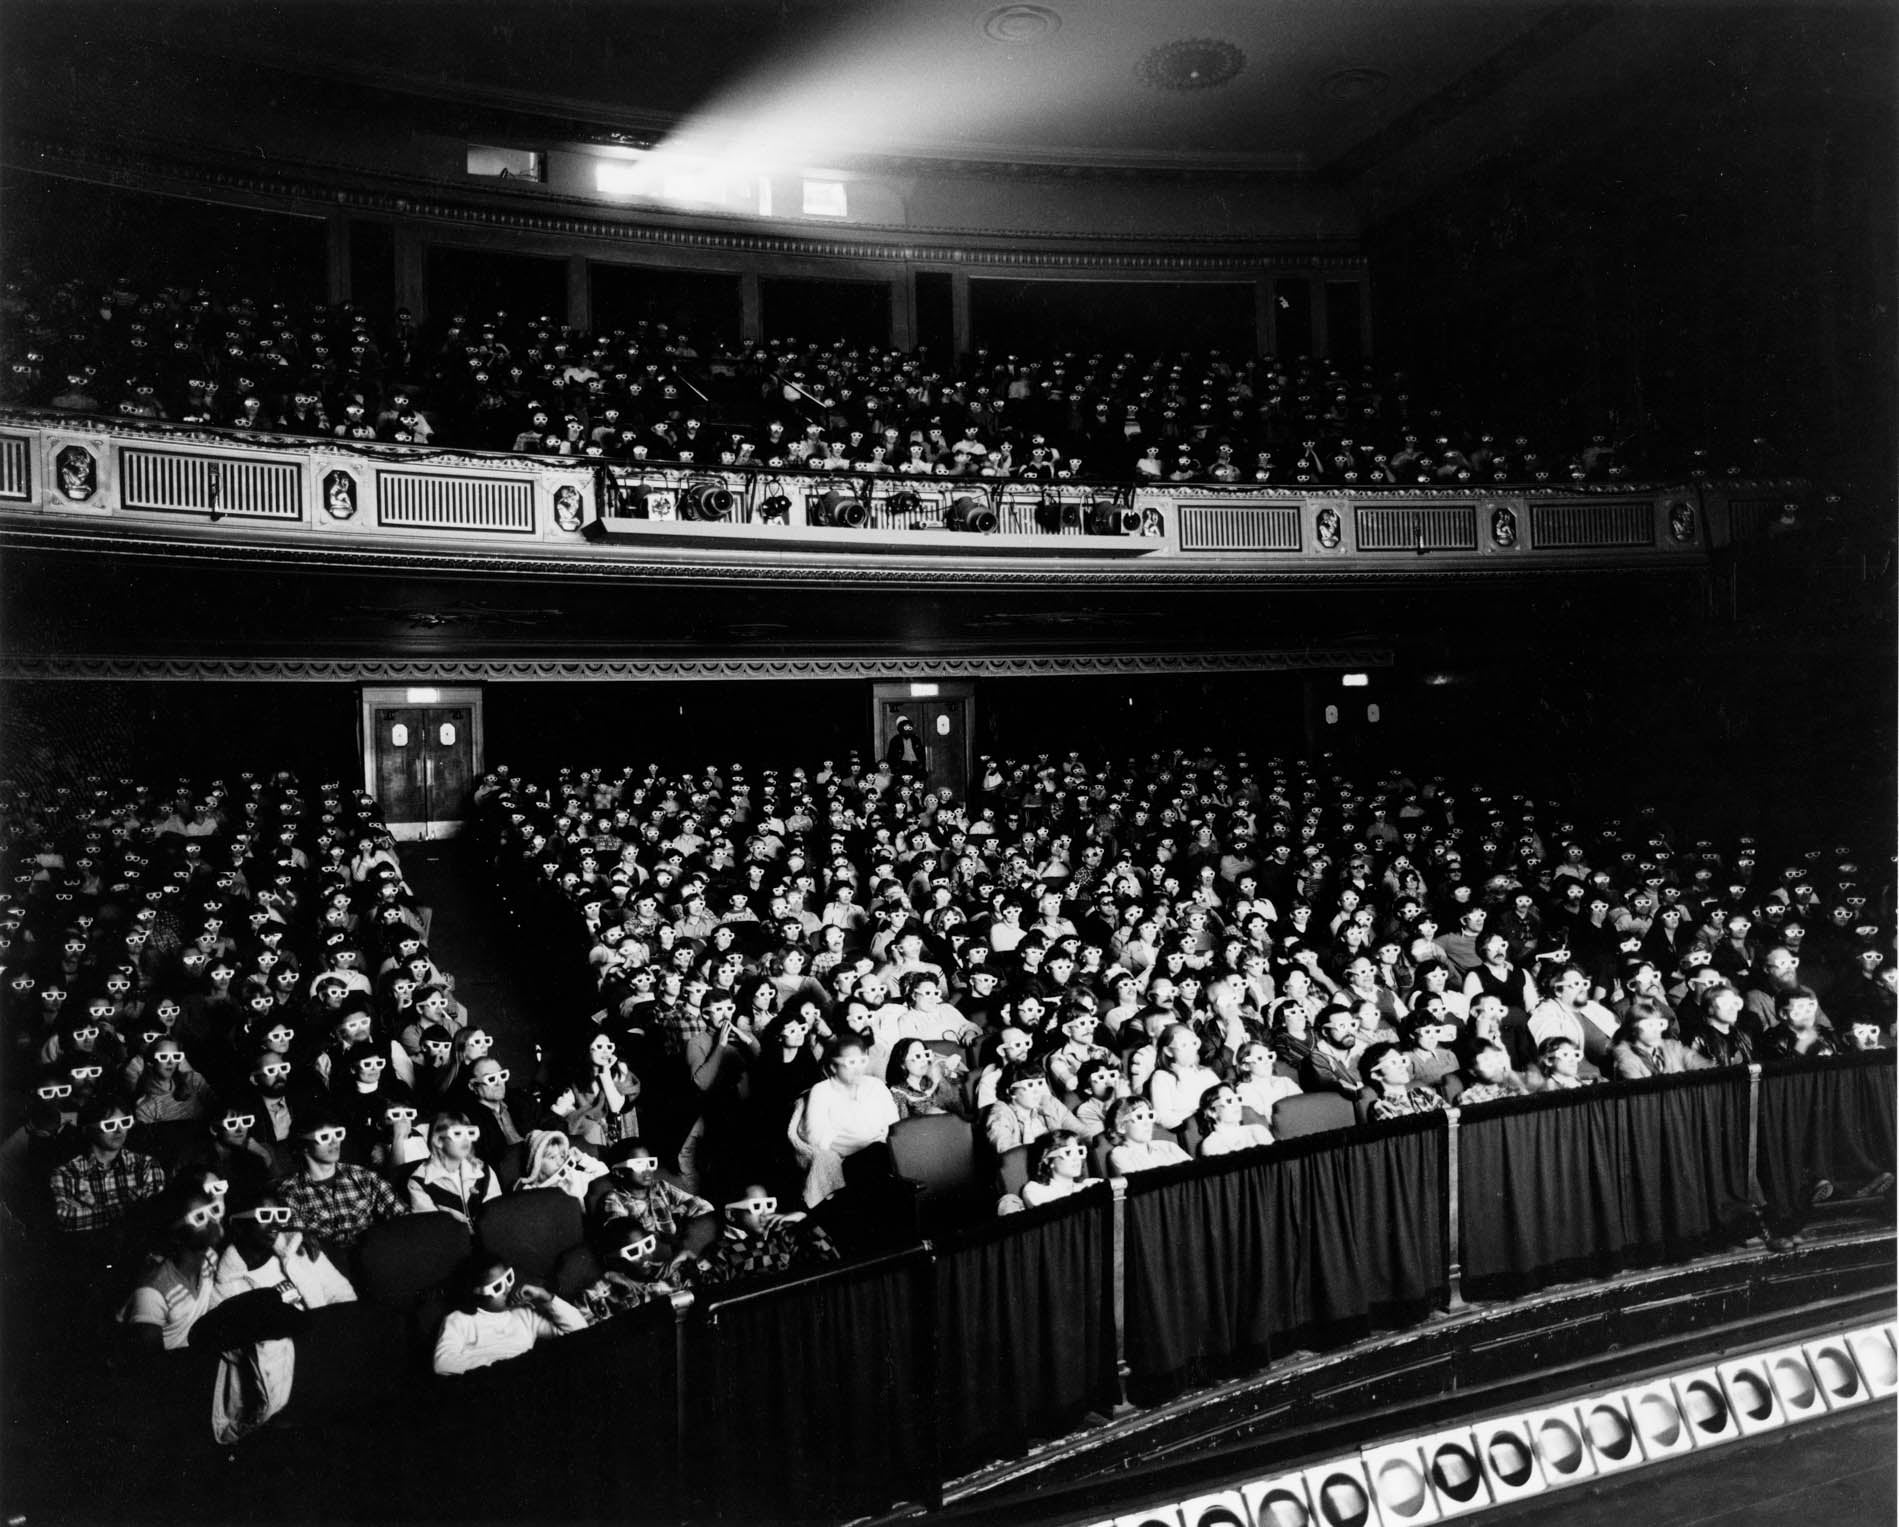 Black and white historical photograph of the audience in the Detroit Film Theatre Auditorium